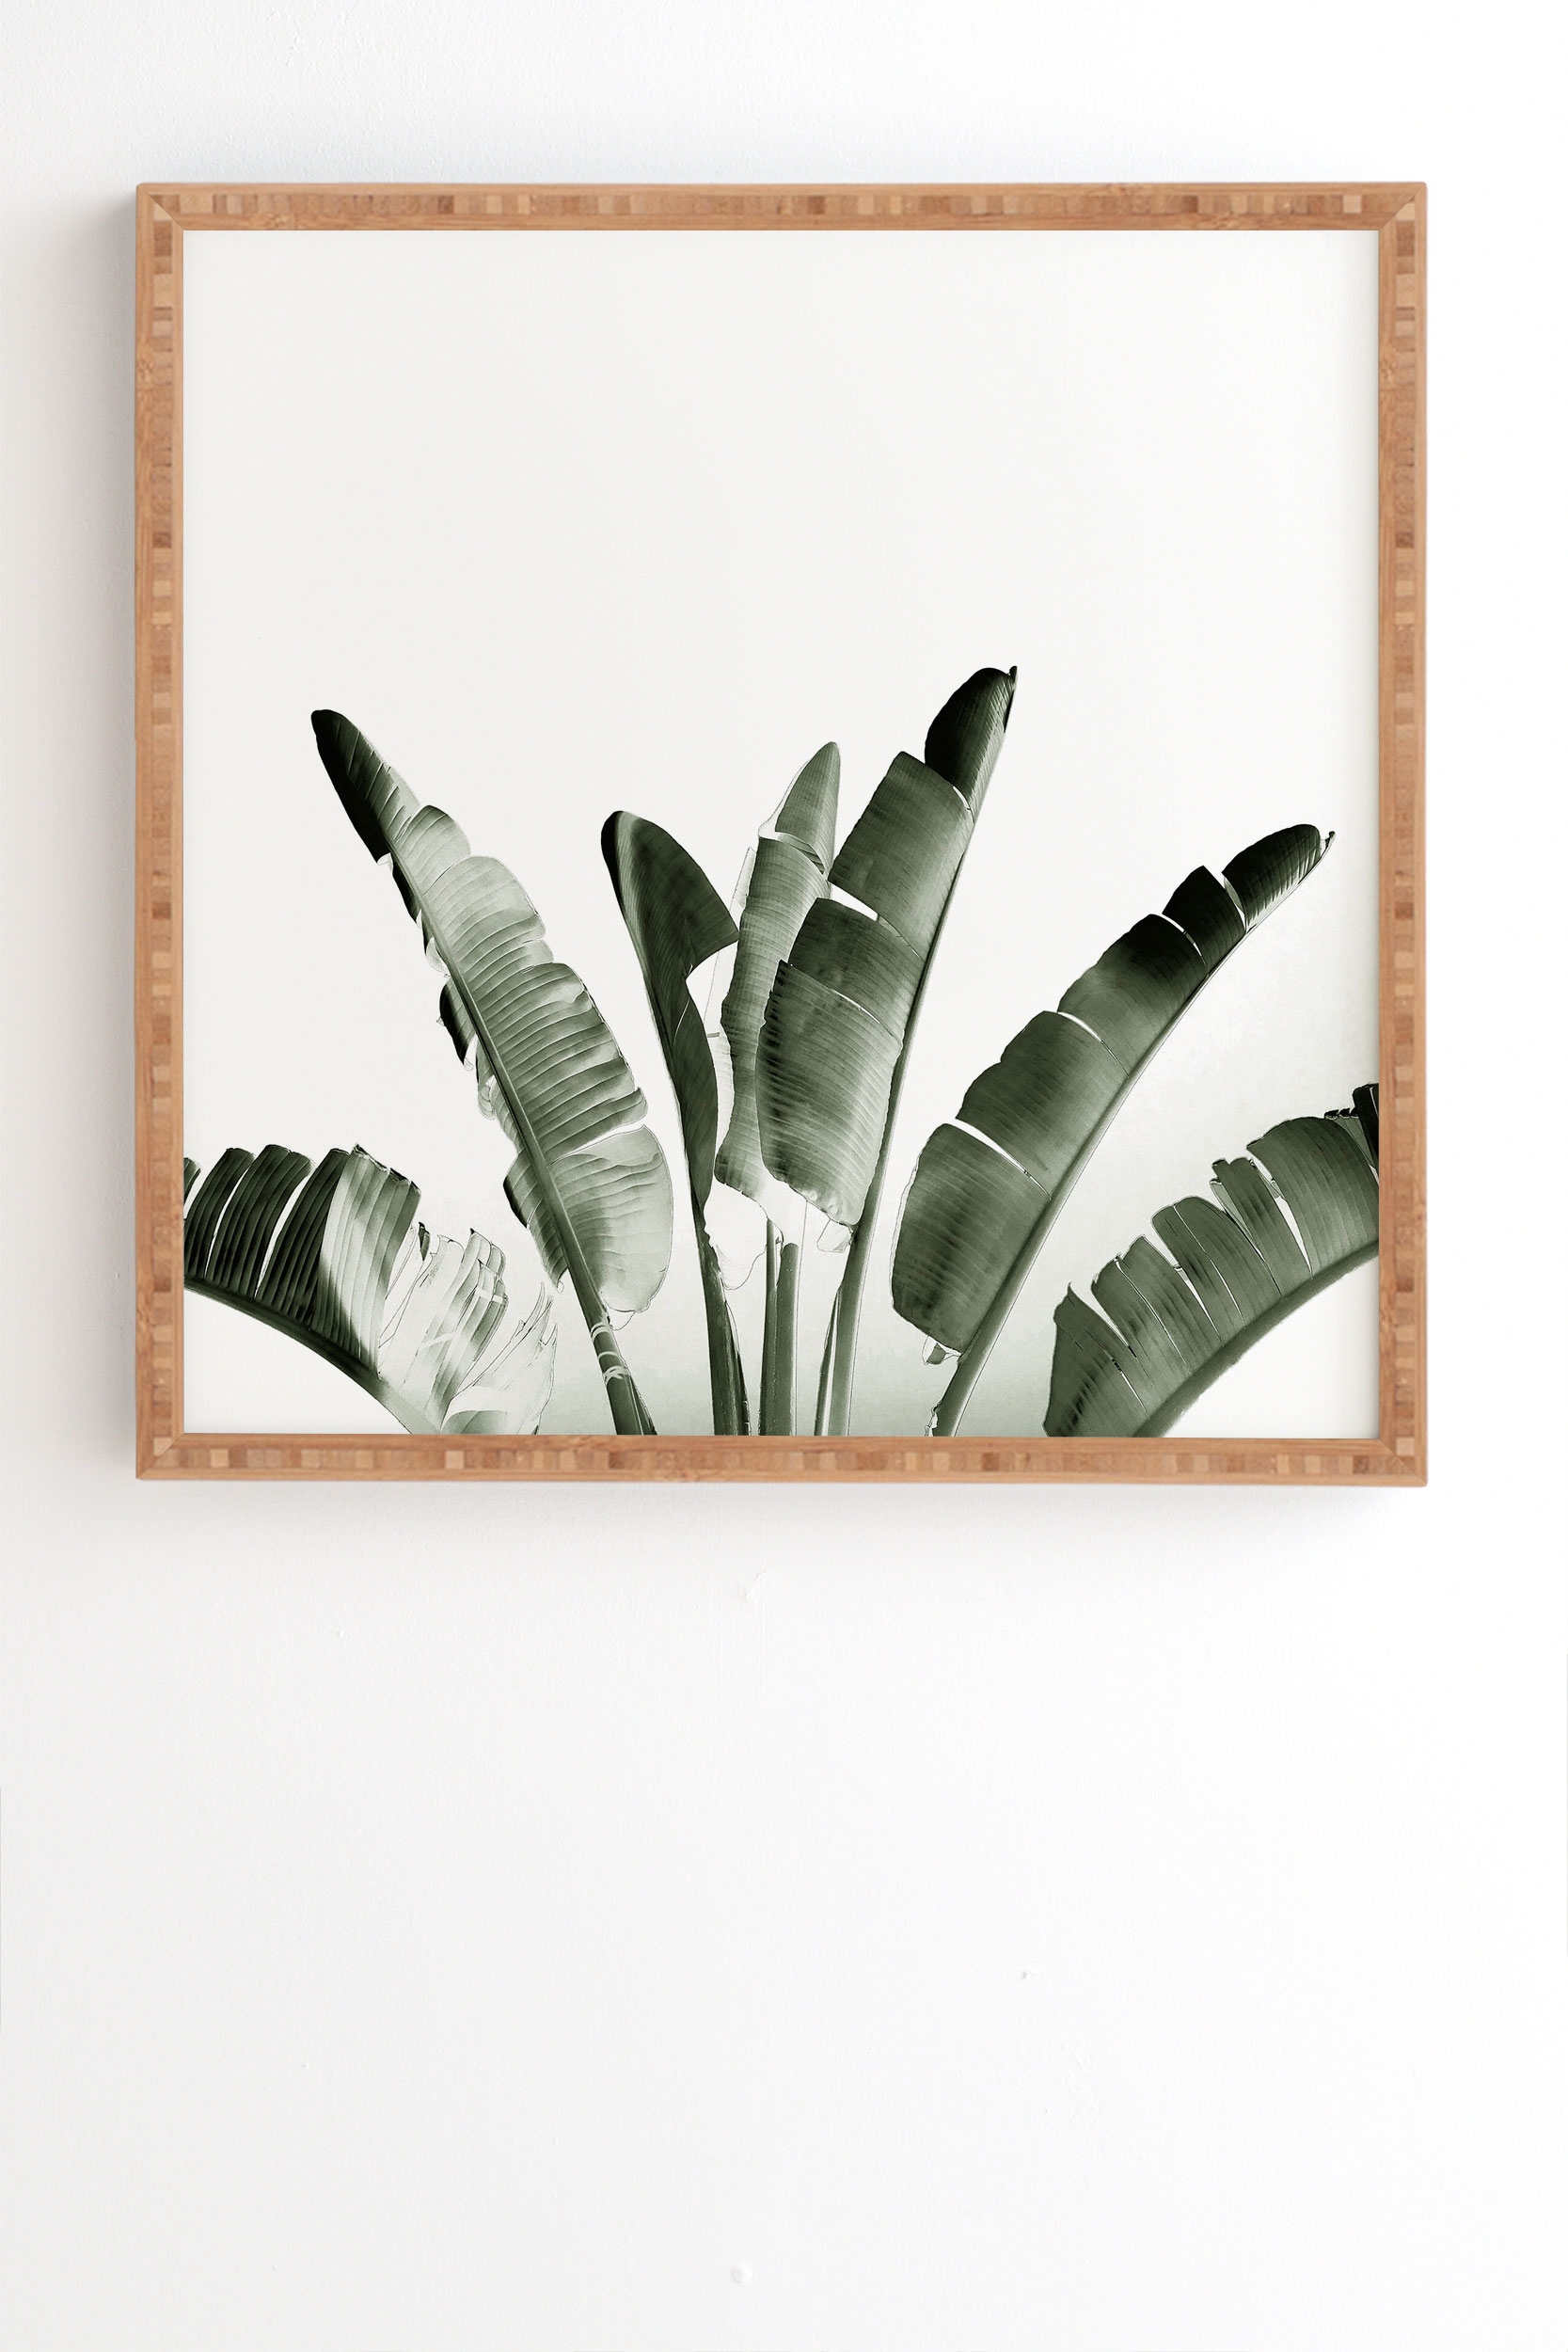 Traveler Palm by Gale Switzer - Framed Wall Art Bamboo 19" x 22.4" - Image 1